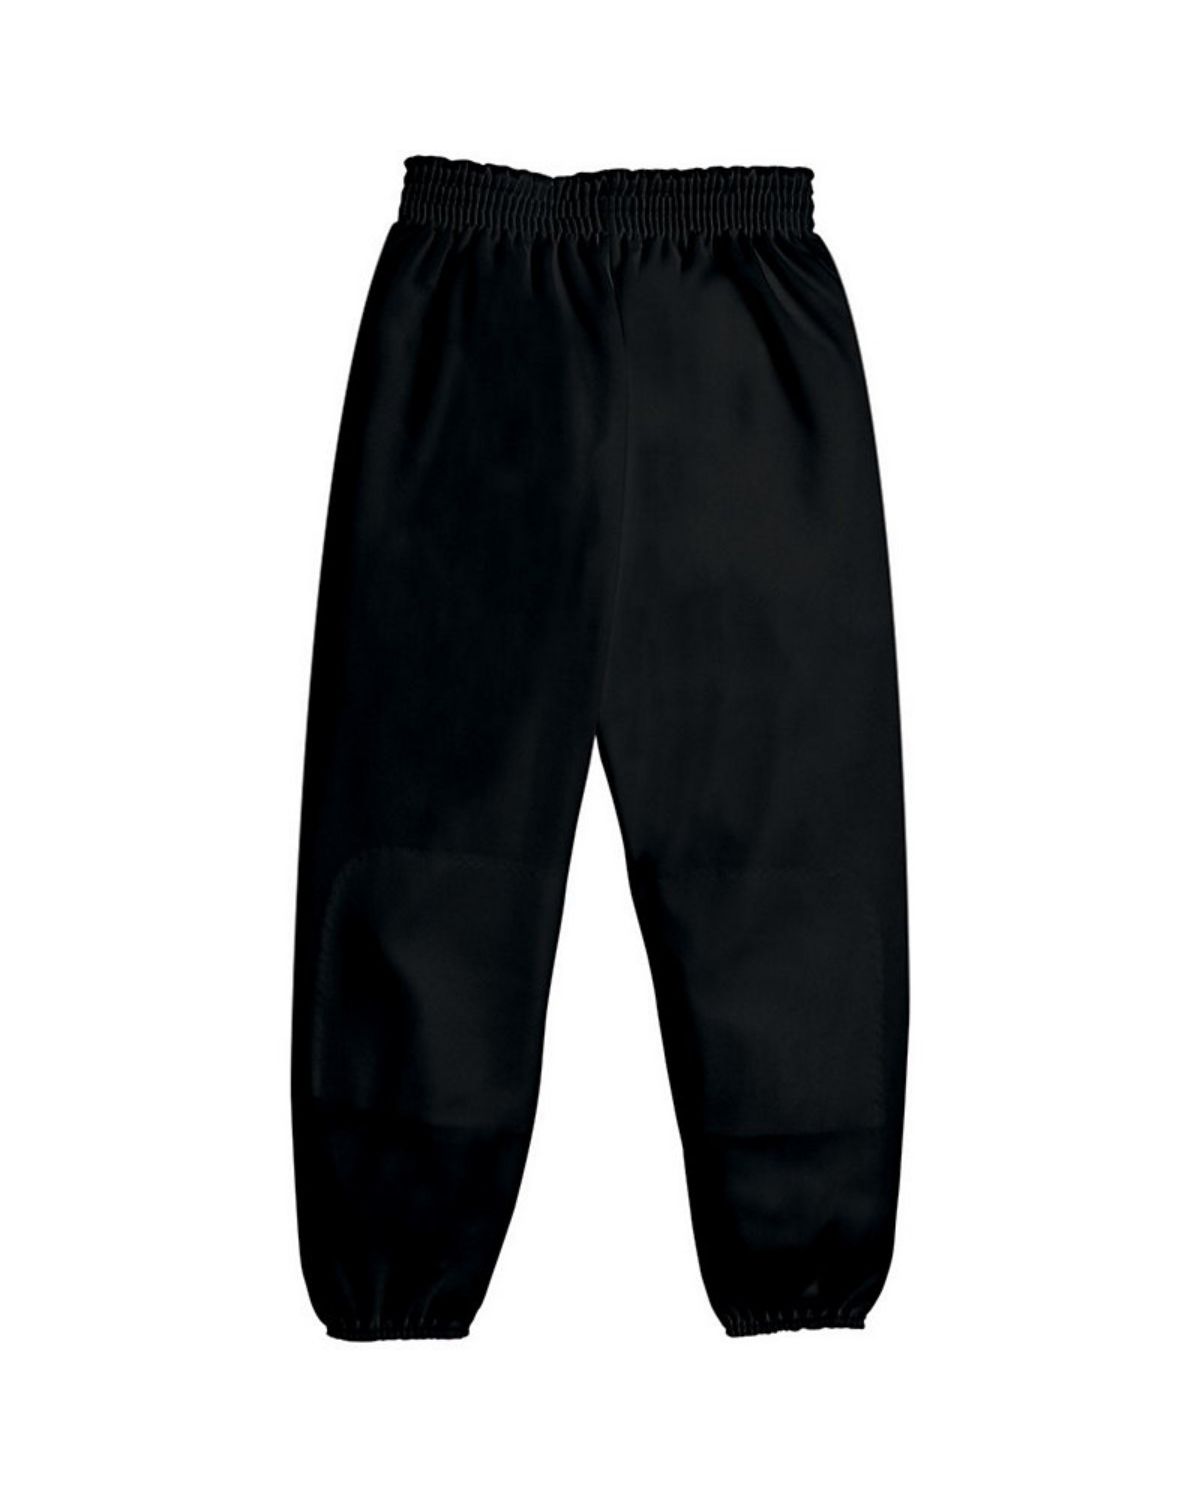 'High Five 319420-C Double-Knit Pull-Up Pant'